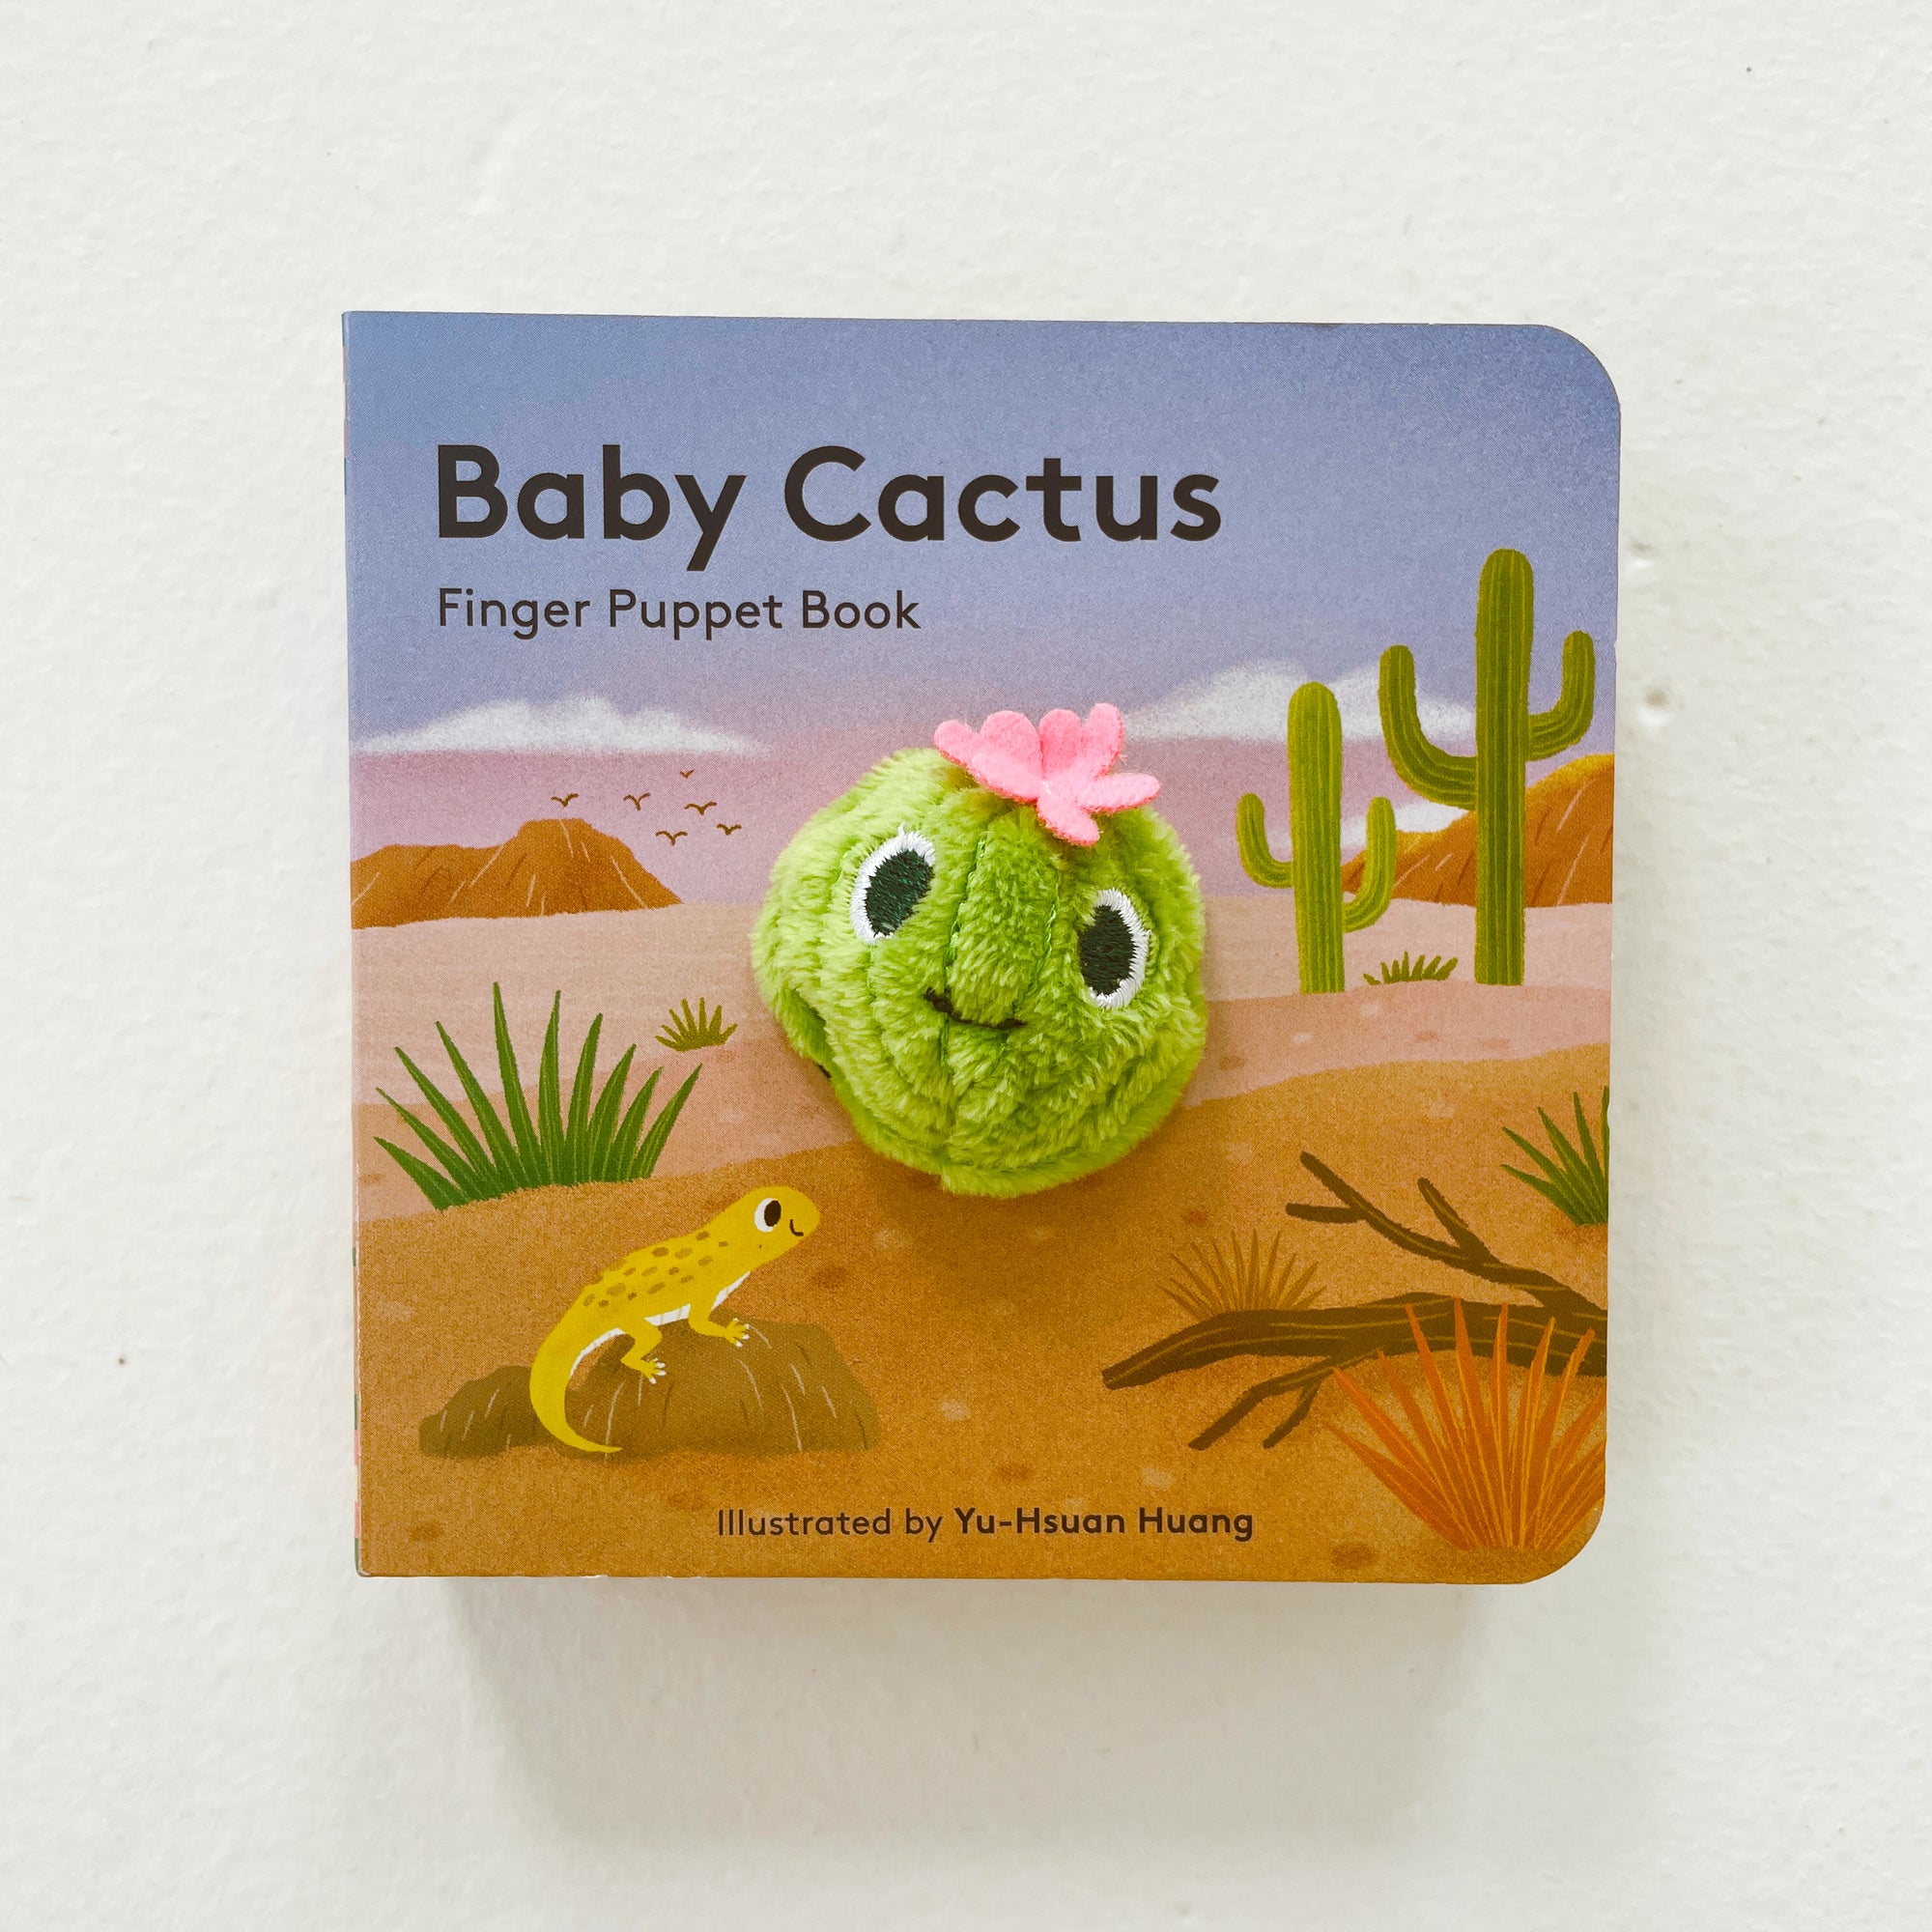 BABY CACTUS: FINGER PUPPET BOOK